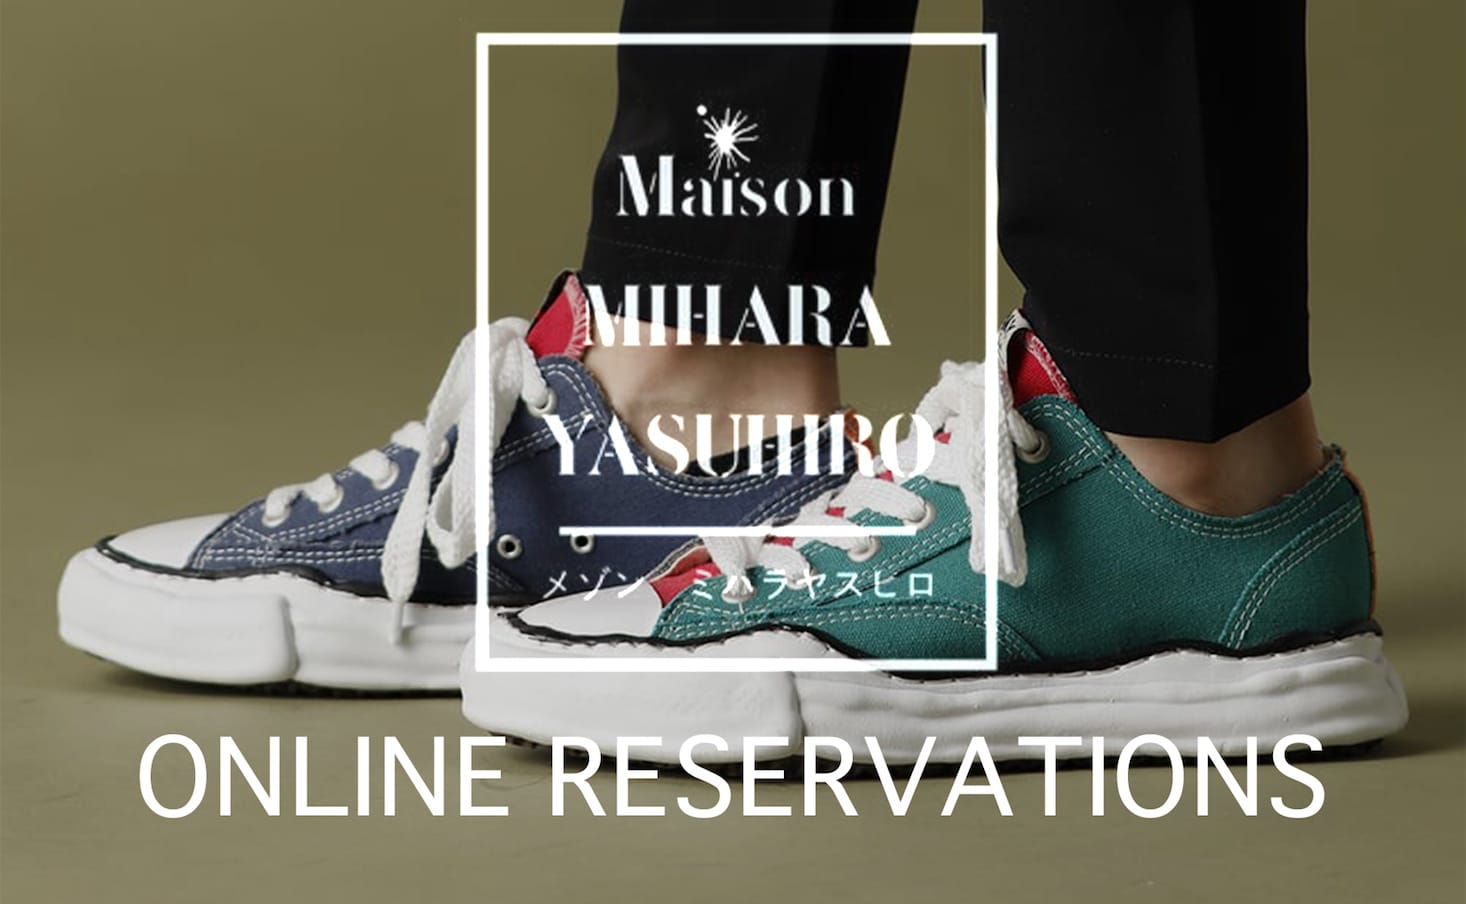 Maison MIHARAYASUHIRO original sole sneakers are now available for